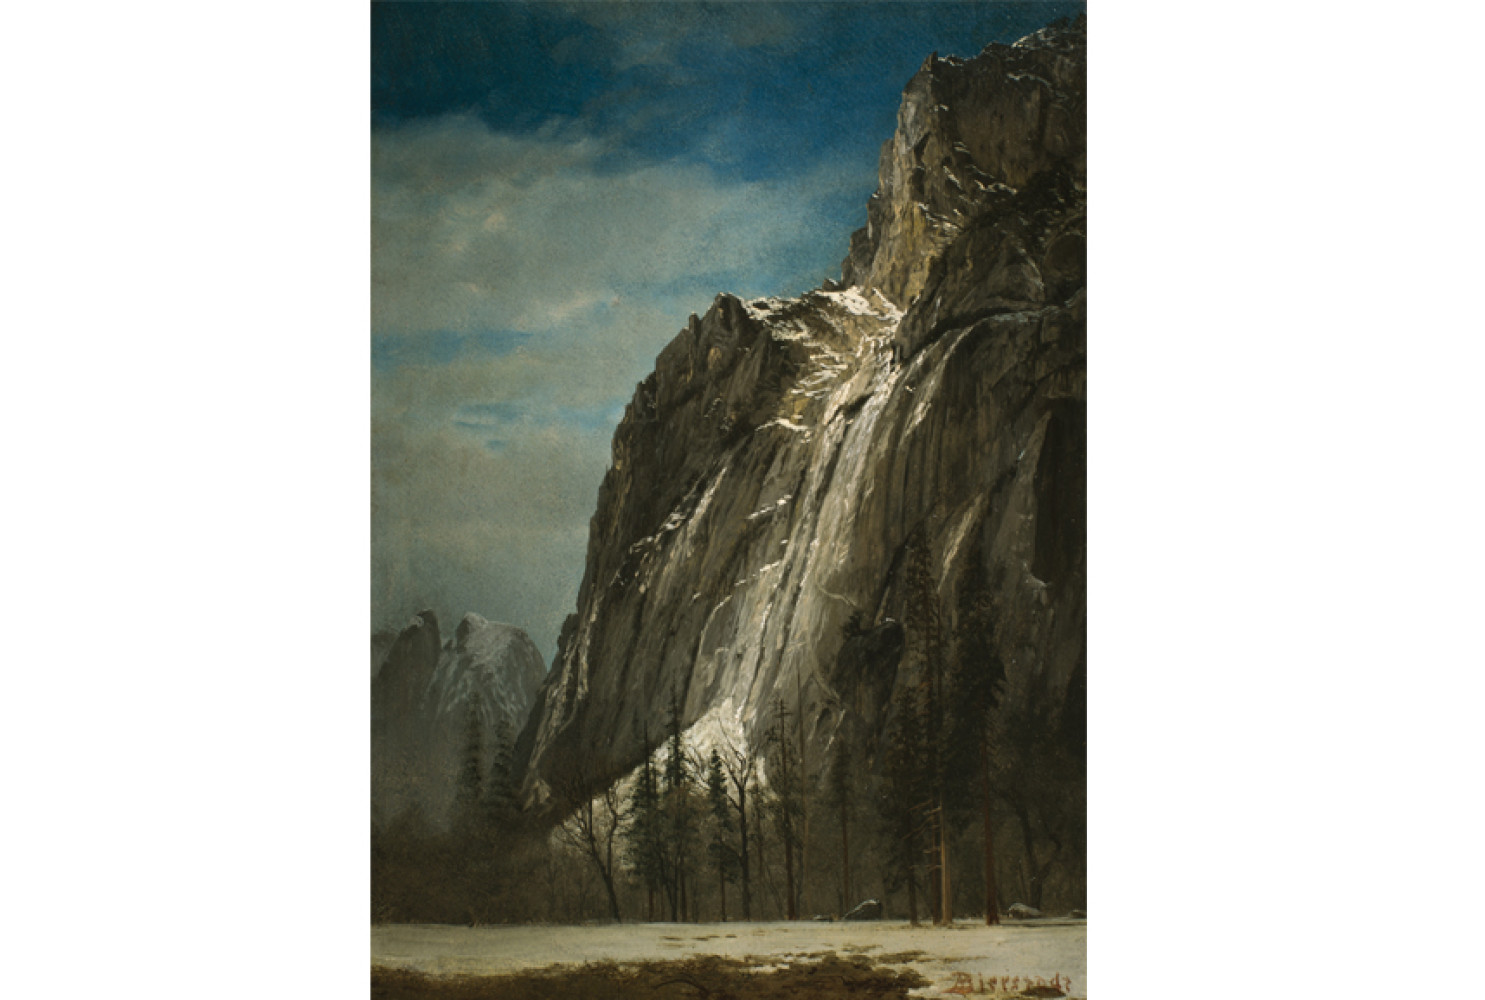 Cathedral Rocks, A View of Yosemite, ca. 1872, By Albert Bierstadt (American, 1830-1902), Oil on paper mounted on canvas, 19 x 13.75 inches, Courtesy of the Higdon Collection. 
